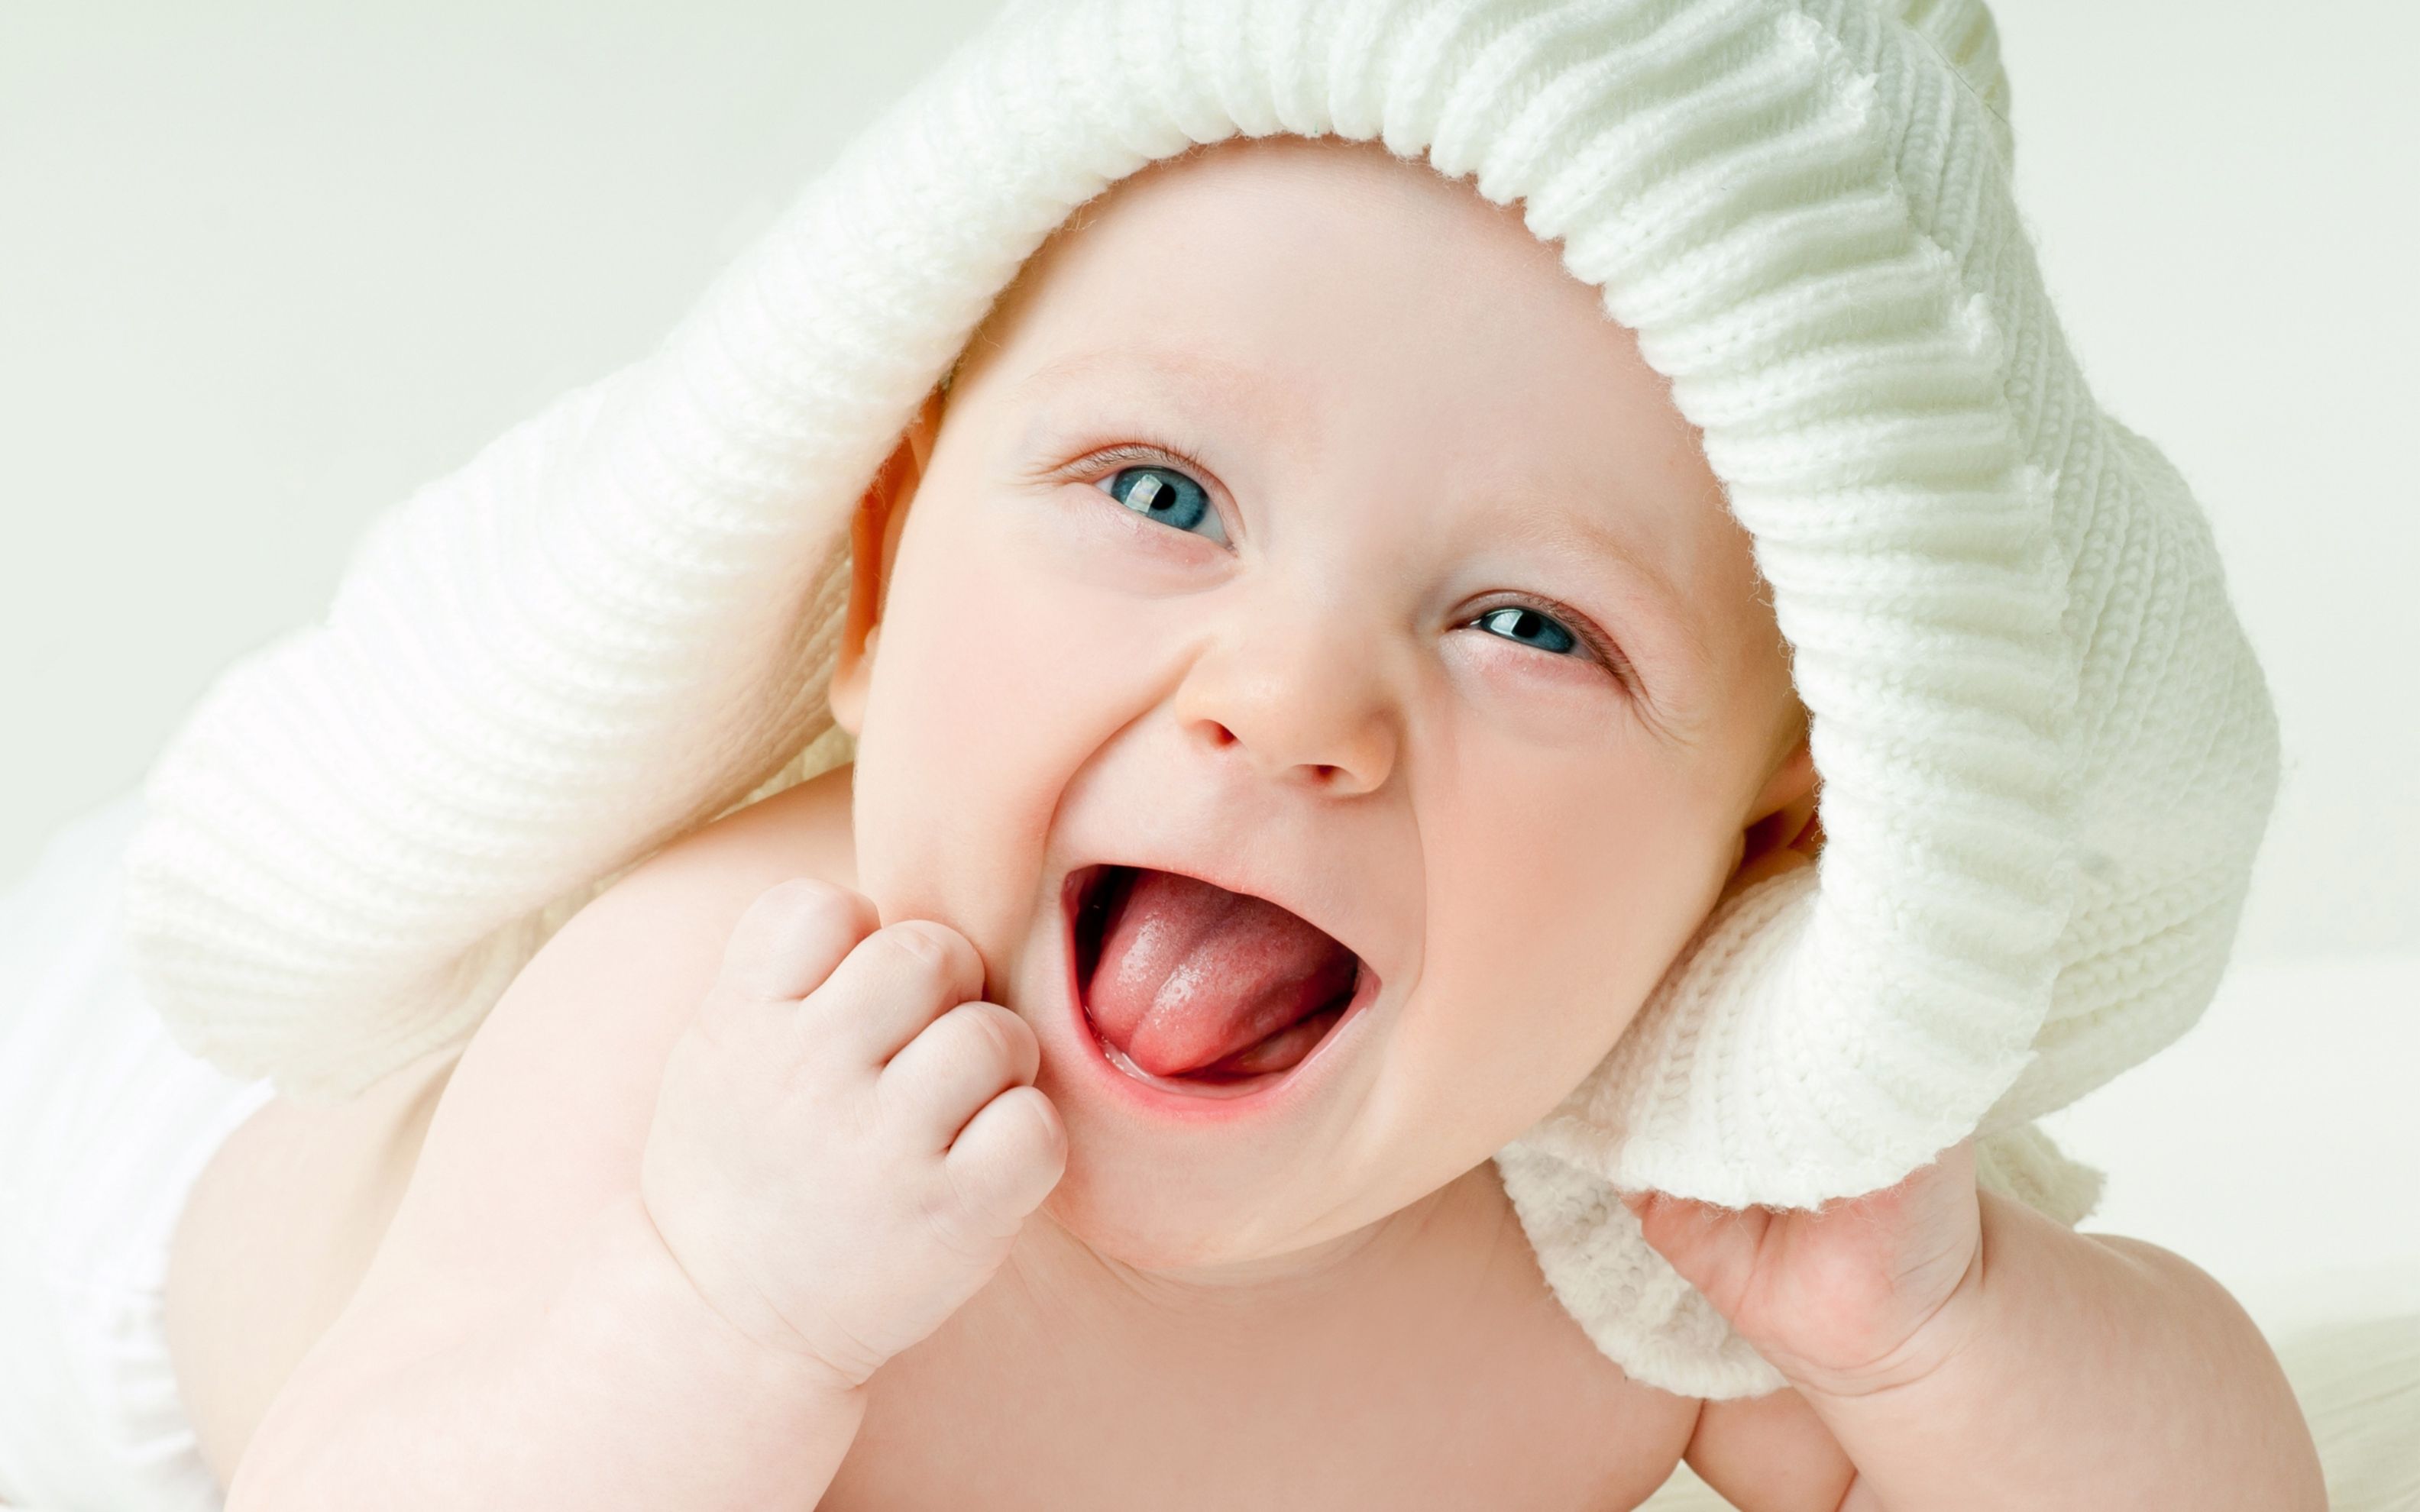 small kids wallpaper,child,baby,face,skin,facial expression